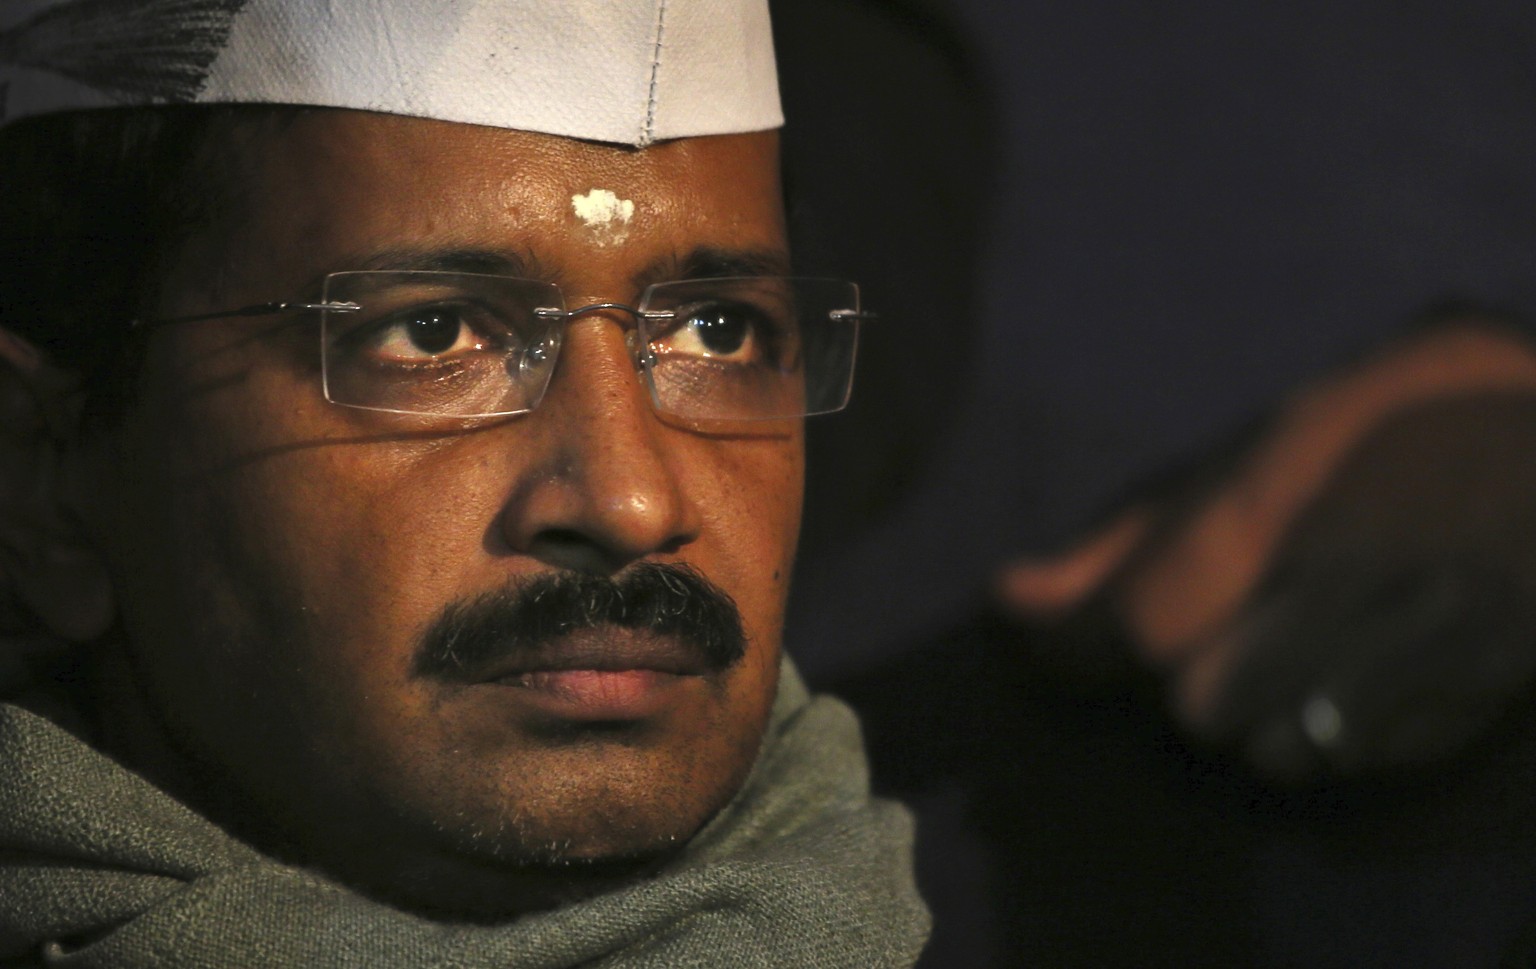 Aam Aadmi Party, or Common Man&#039;s Party, leader Arvind Kejriwal listens to a speaker during a public meeting in New Delhi, India, Dec. 27, 2013. The anti-corruption crusader was arrested on Thursd ...